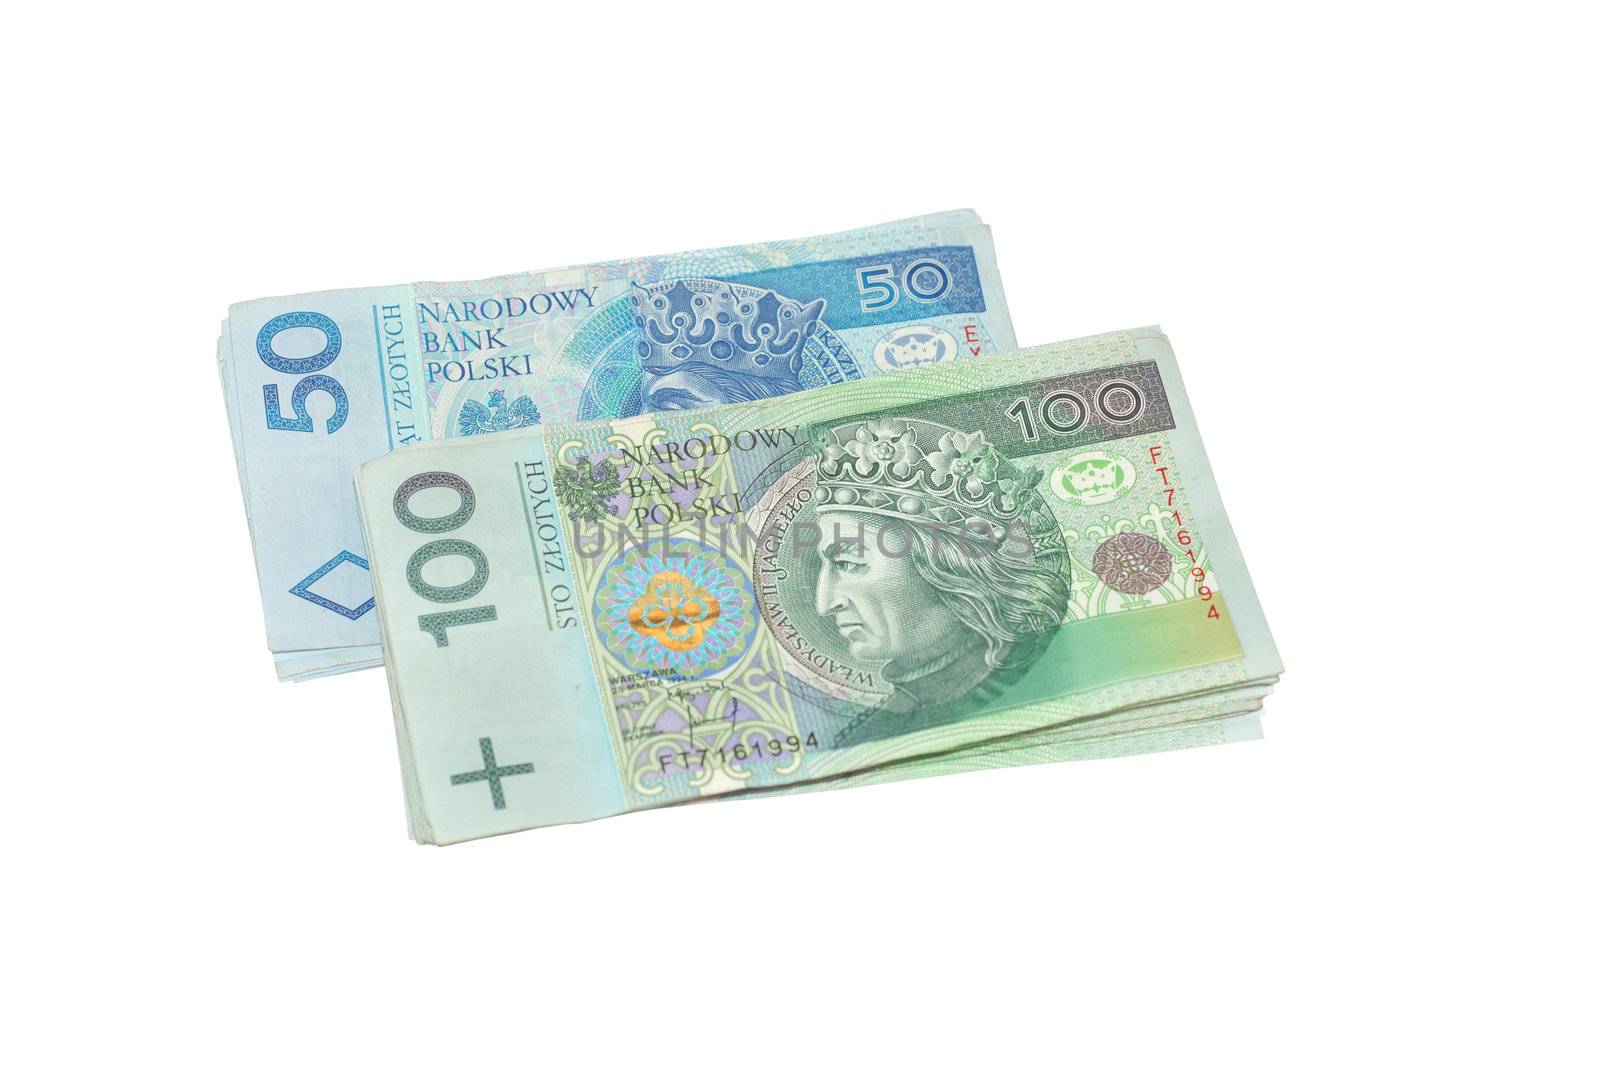 Banknotes 100 and PLN 50. Polish currency.